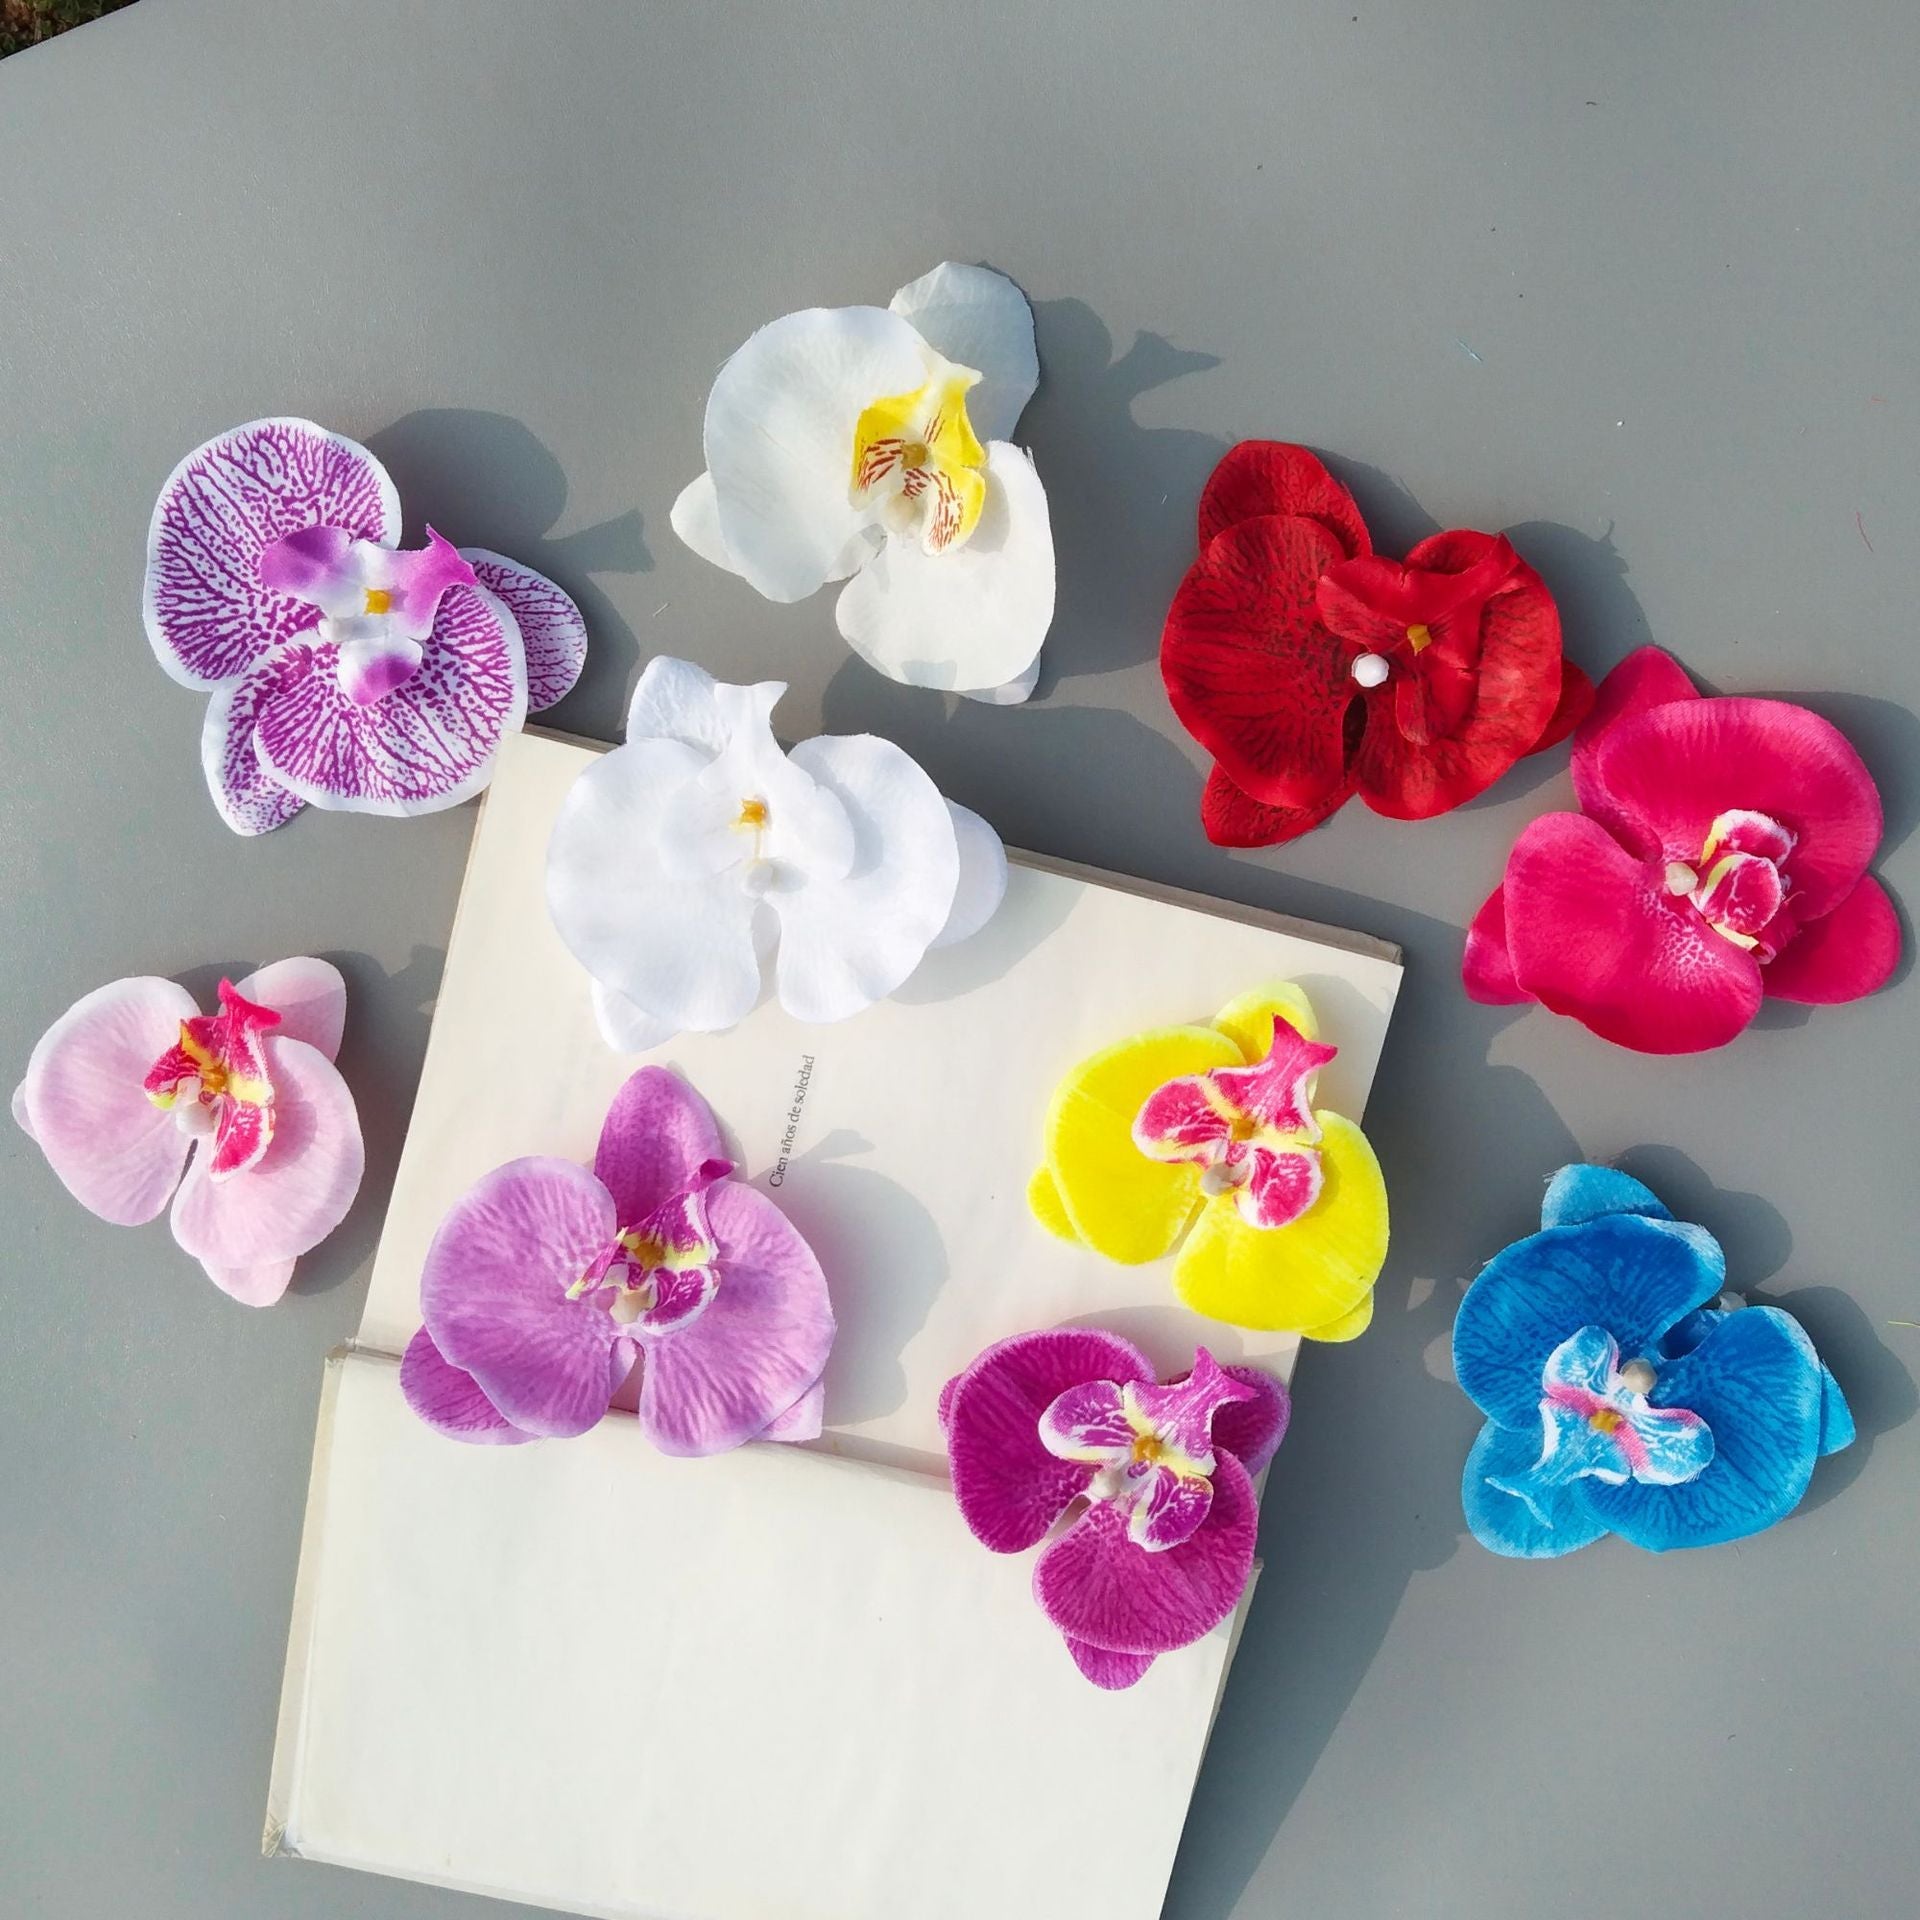 Bulk 20Pcs Artificial Flower Heads Phalaenopsis Butterfly Orchid Heads for Wedding Party Cake Crafts Wholesale